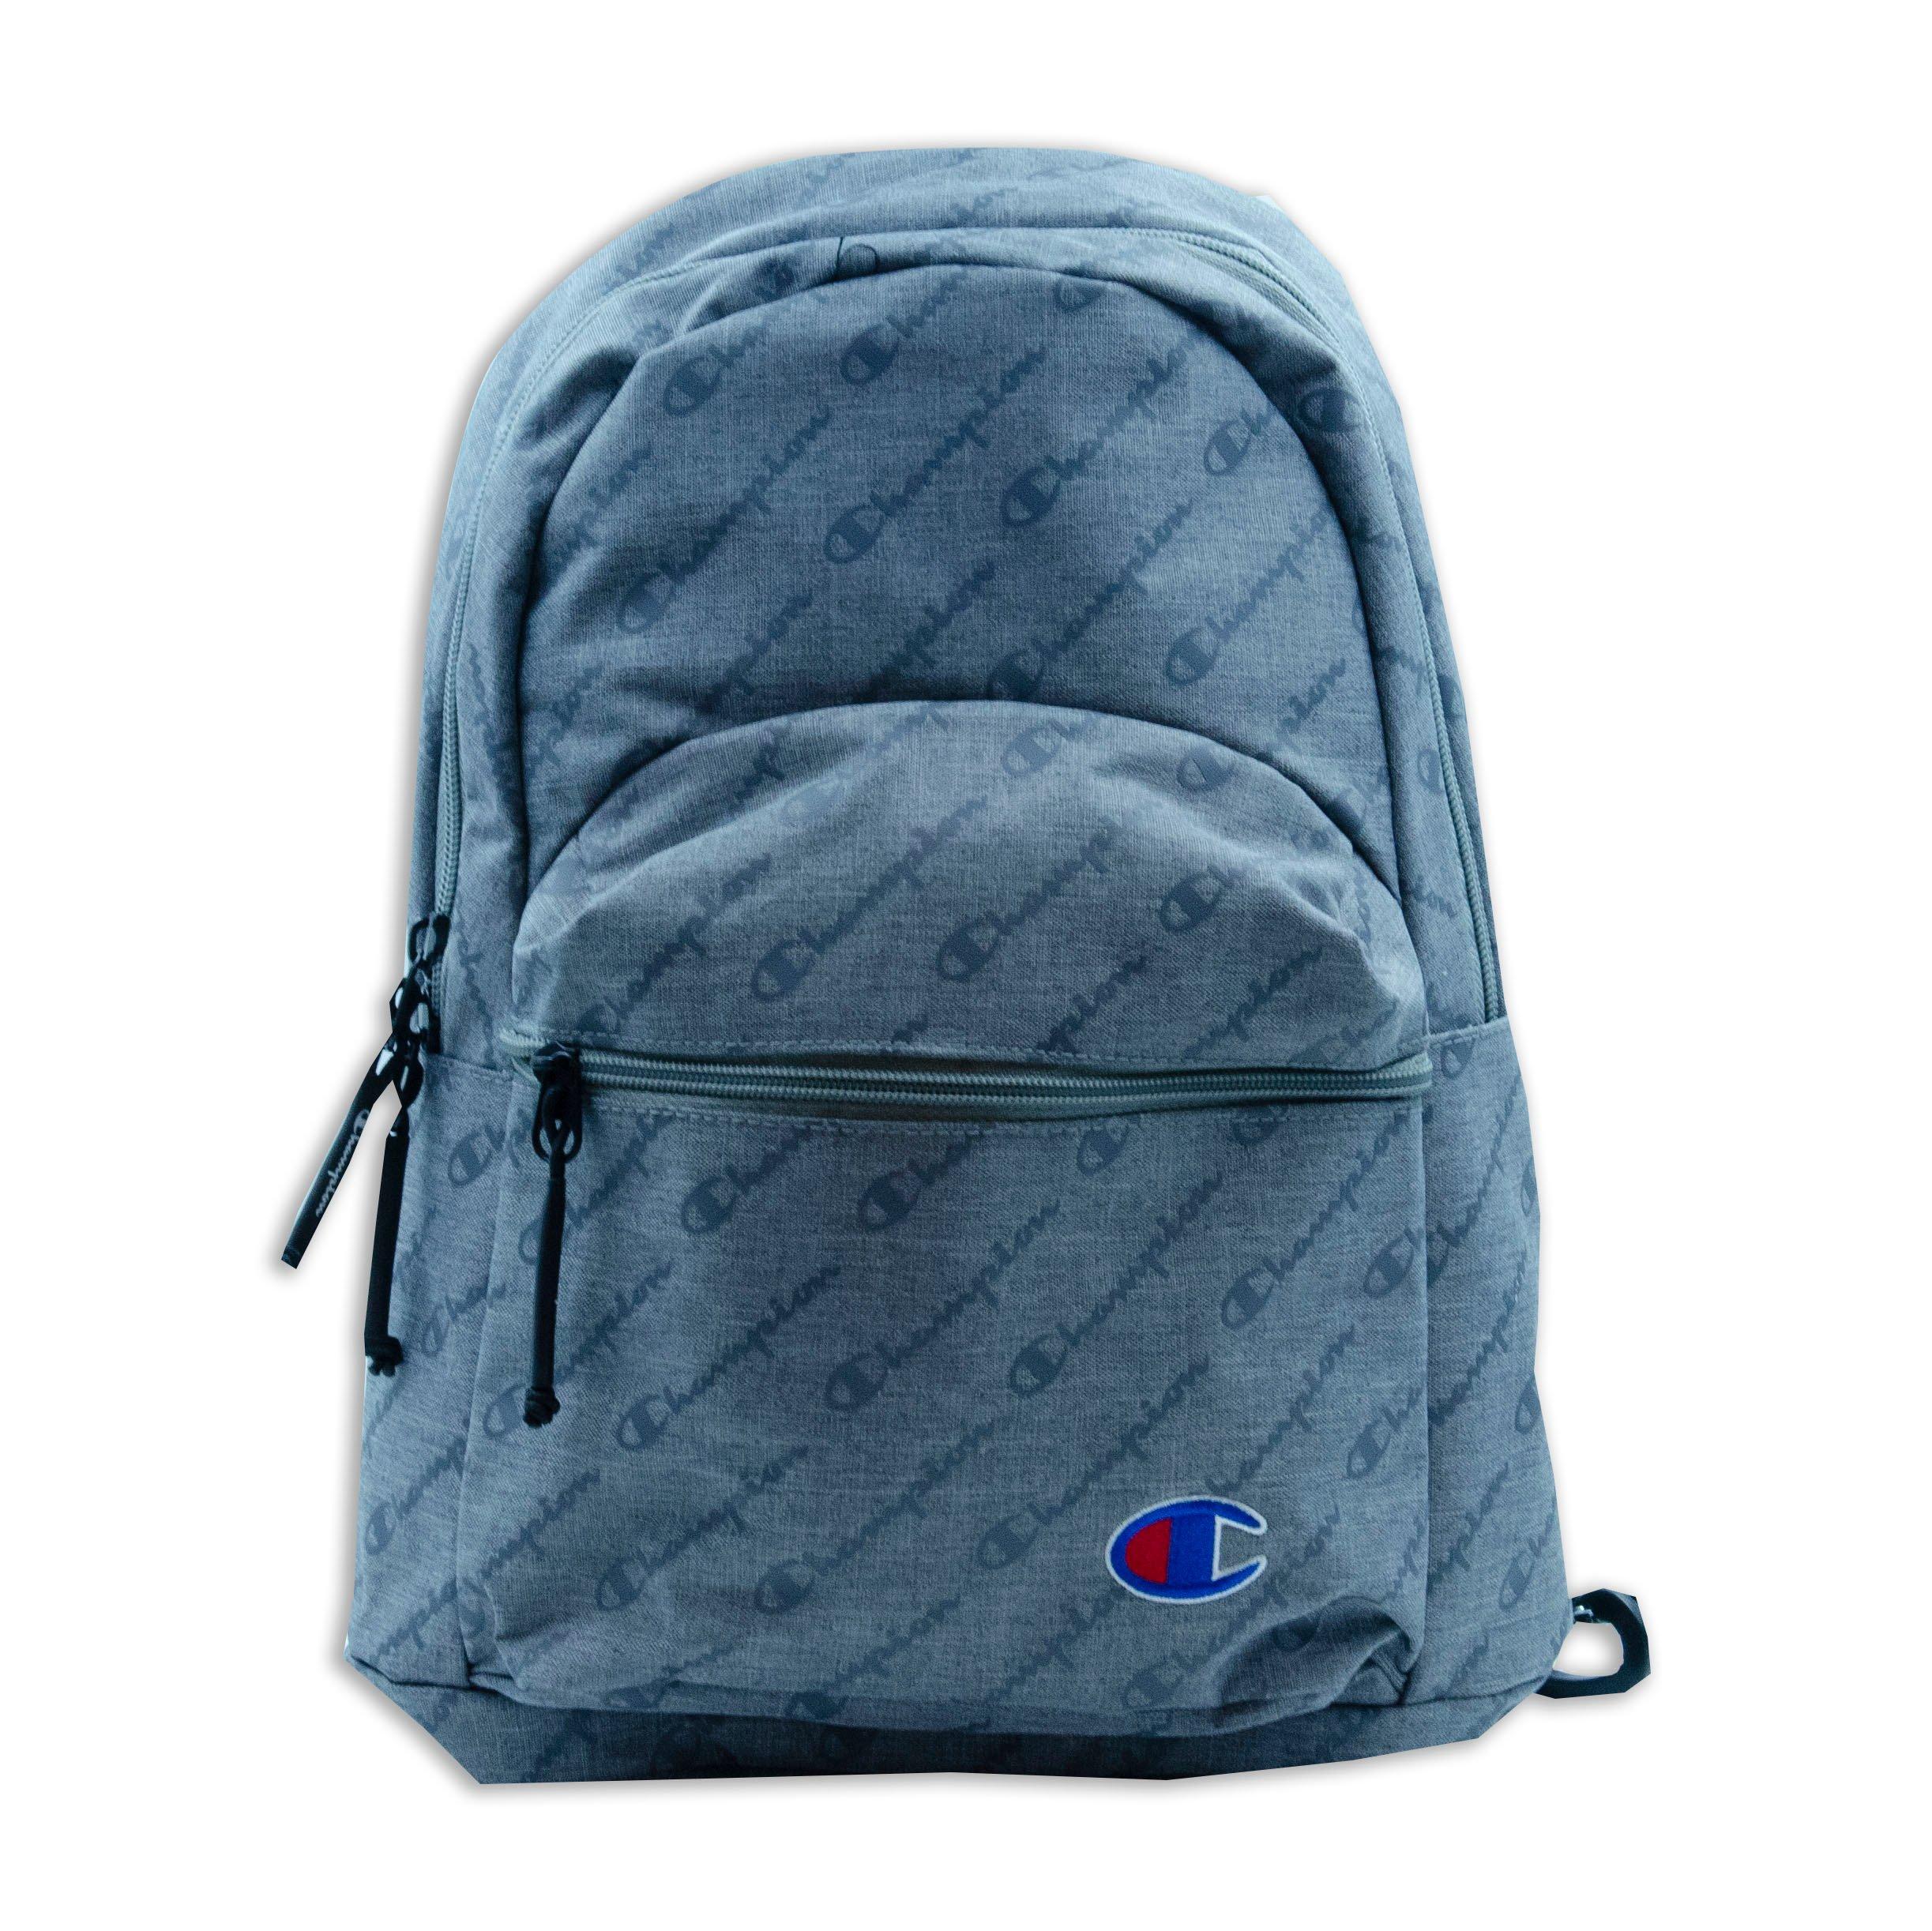 Mini Supercize Crossover Backpack 